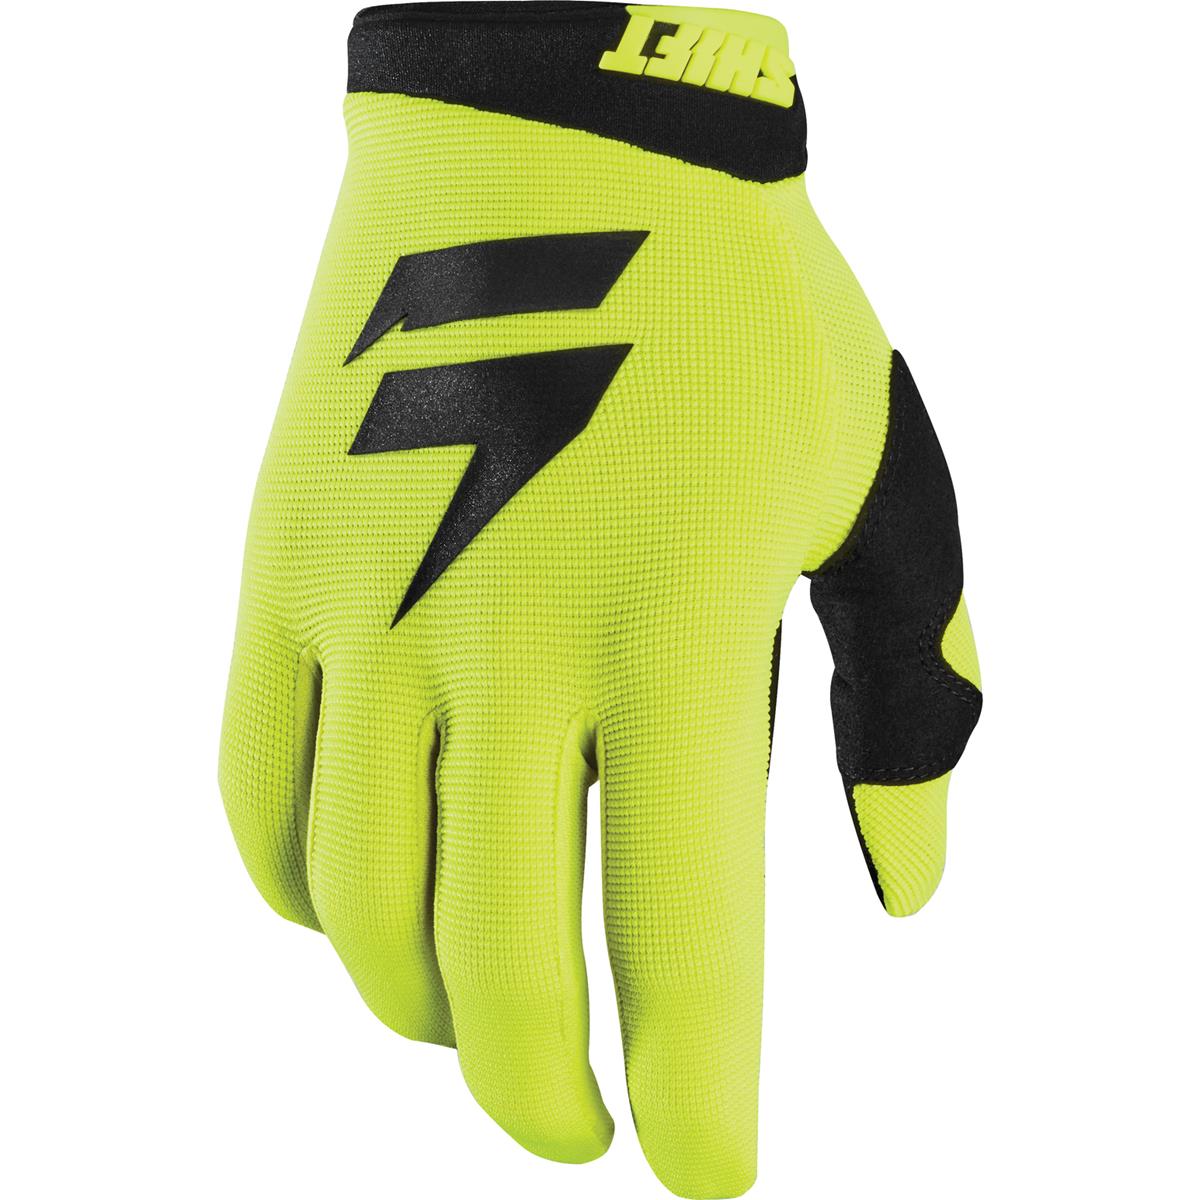 Shift Guanti Whit3 Label Air Giallo Fluo